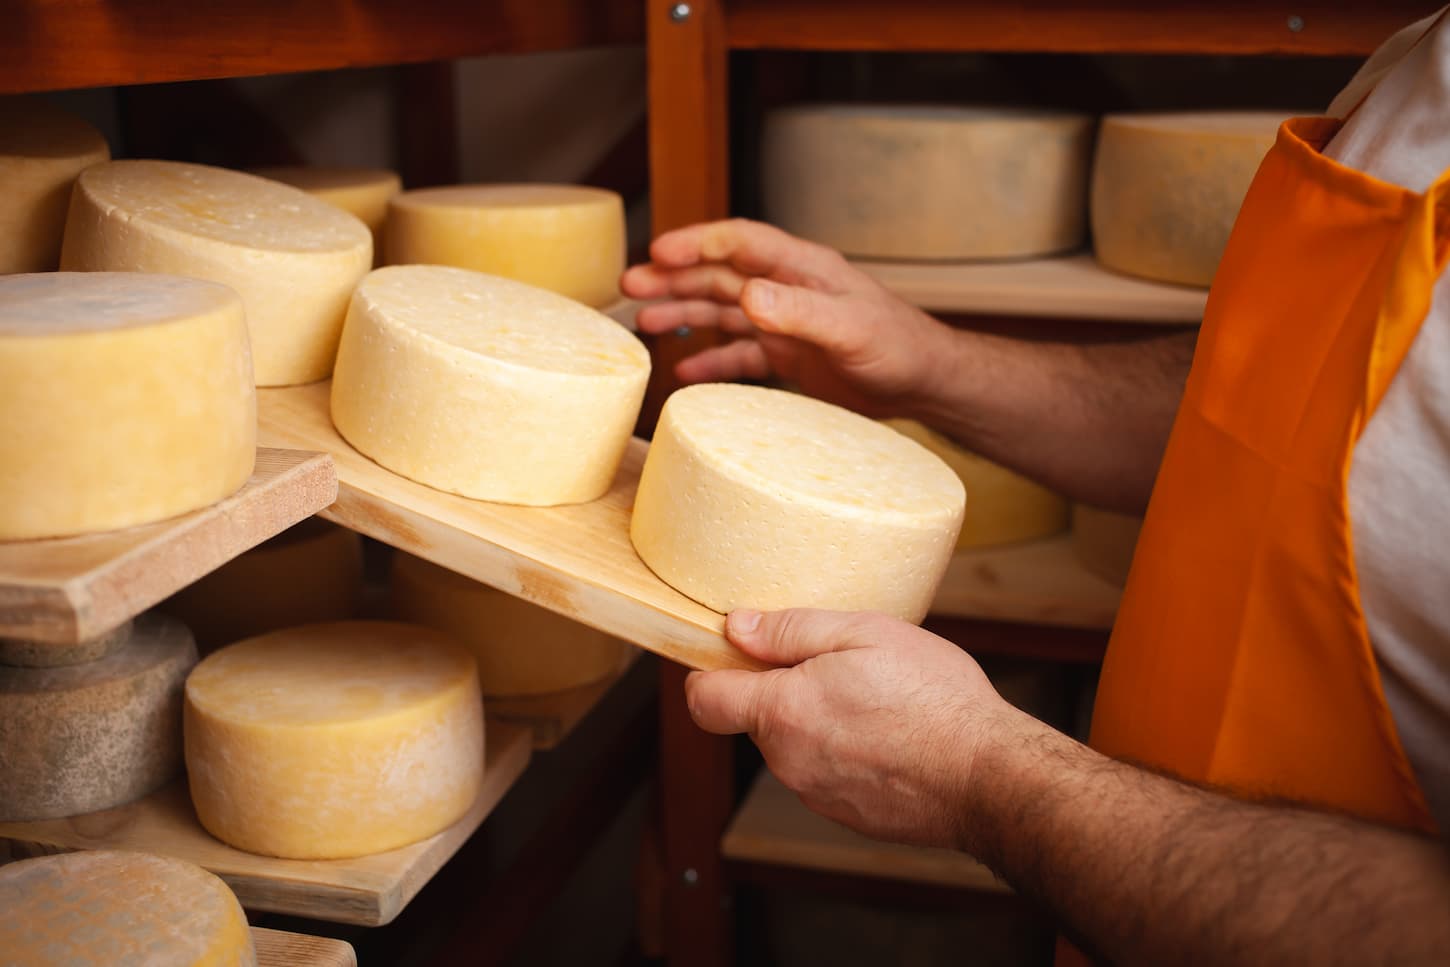 An image of a cheesemaker in the cellar checking on a ripening cheese circle on wooden shelves.